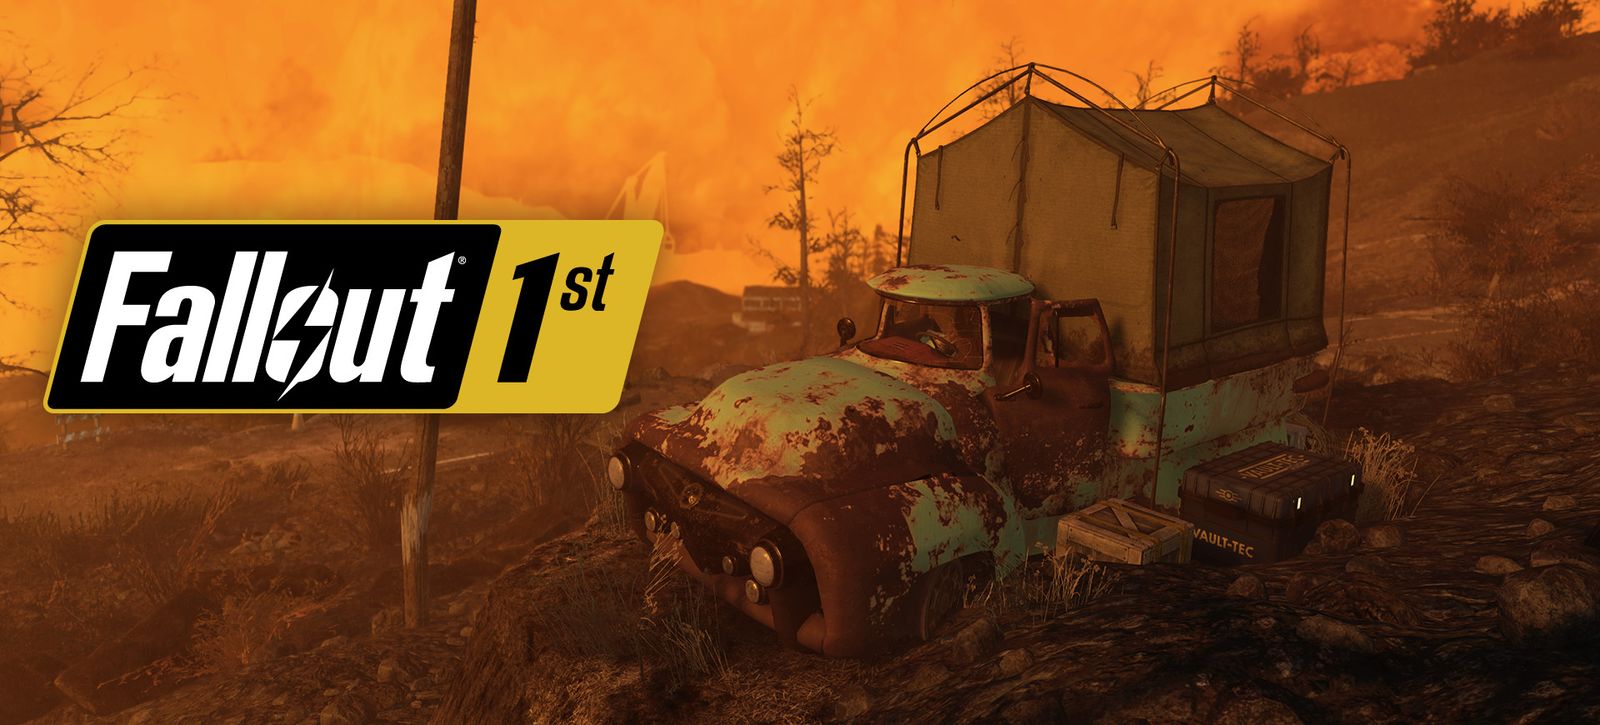 fallout-76-flatbed-truck-survival-tent